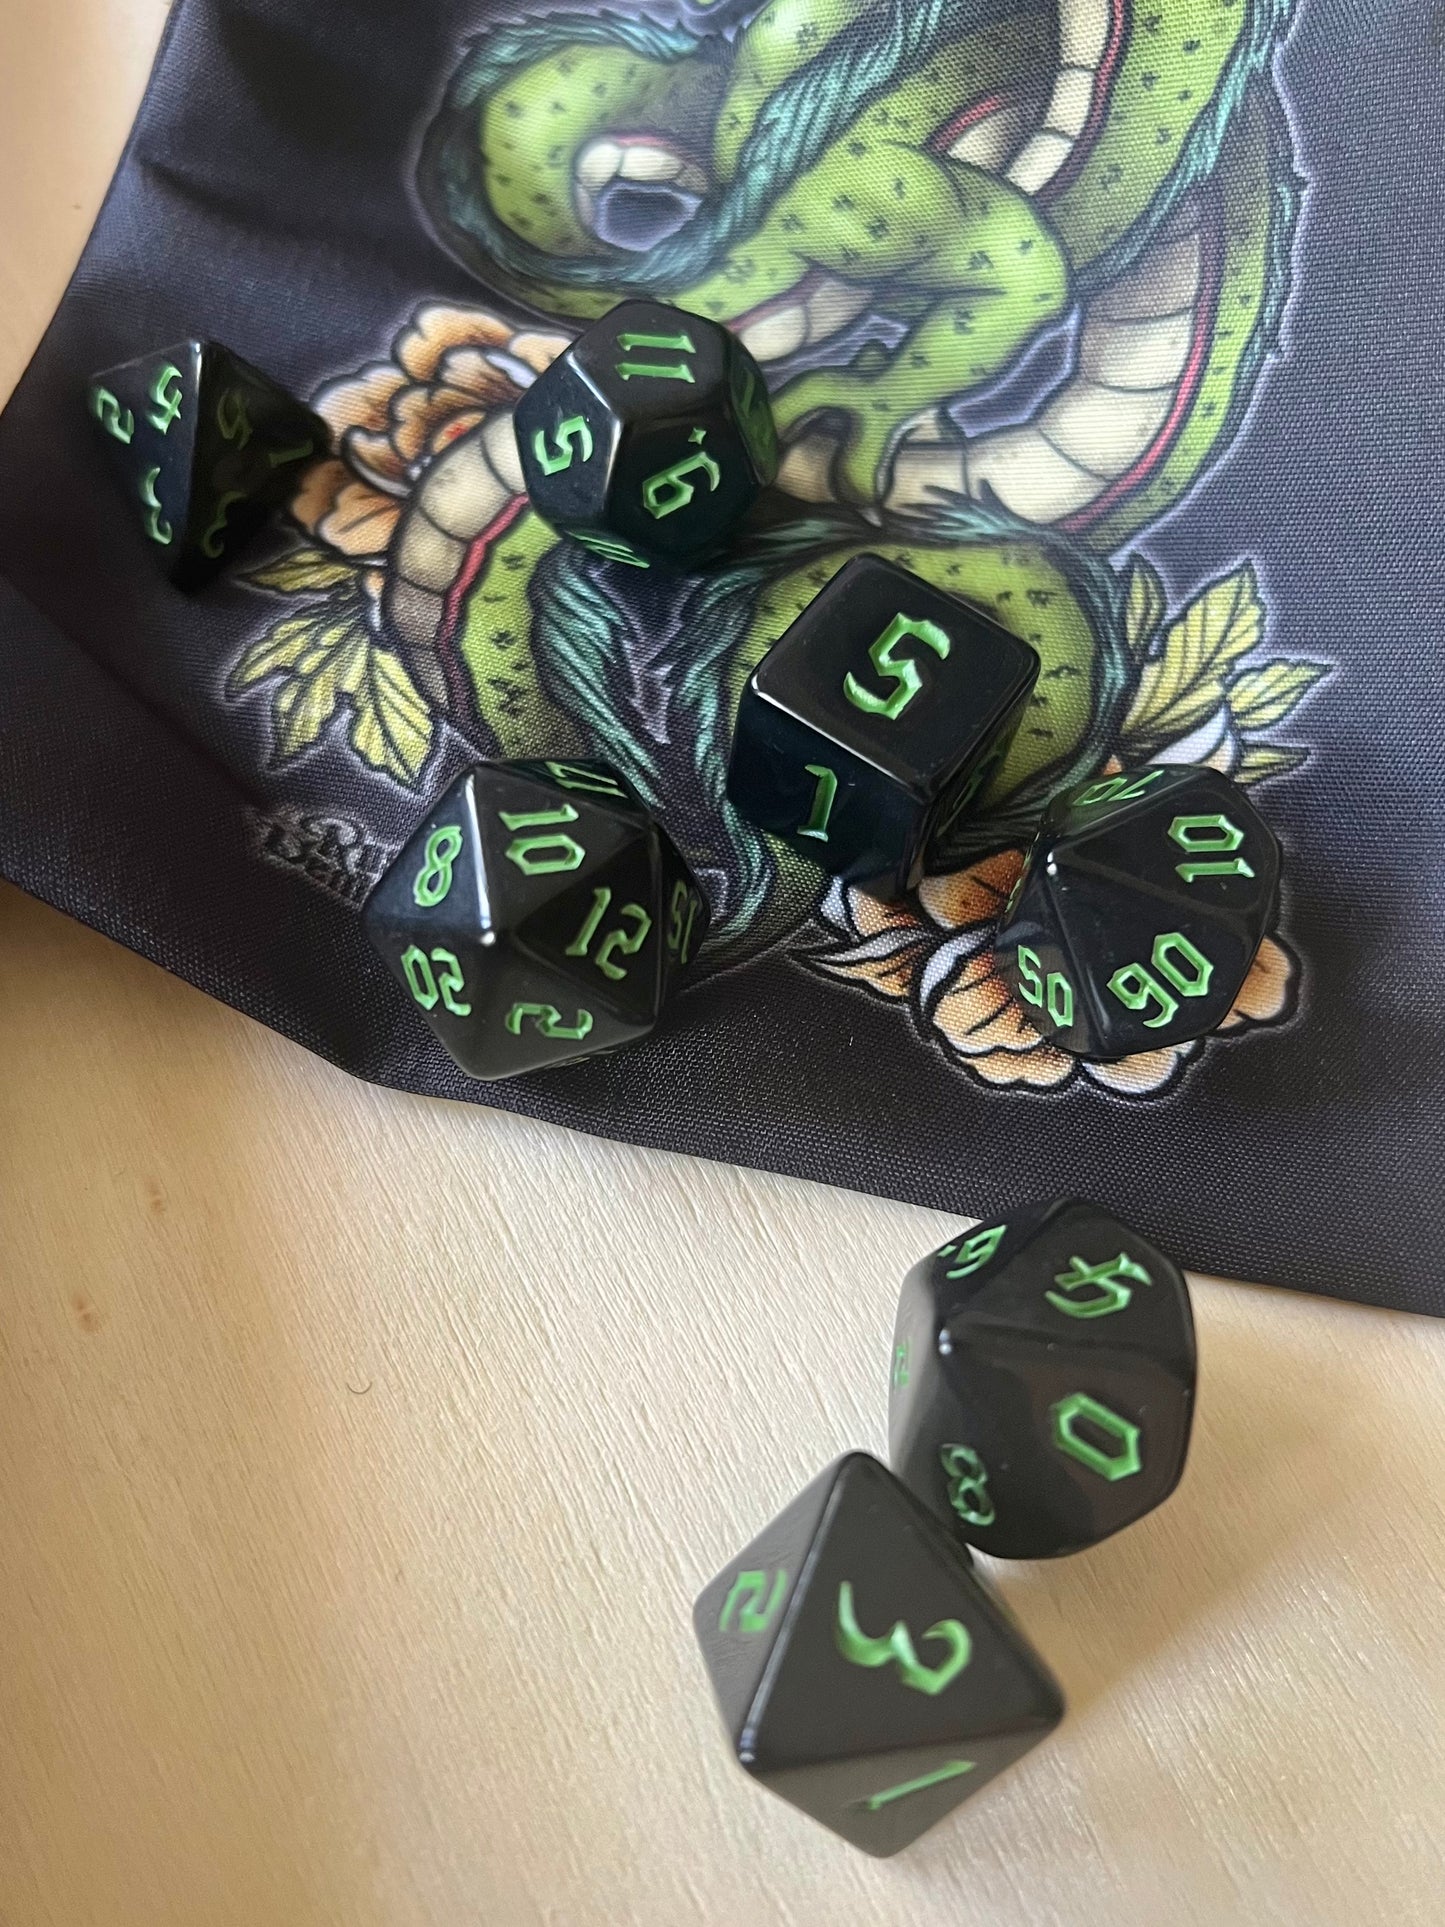 ENTER THE DRAGON - Table top gaming dice set